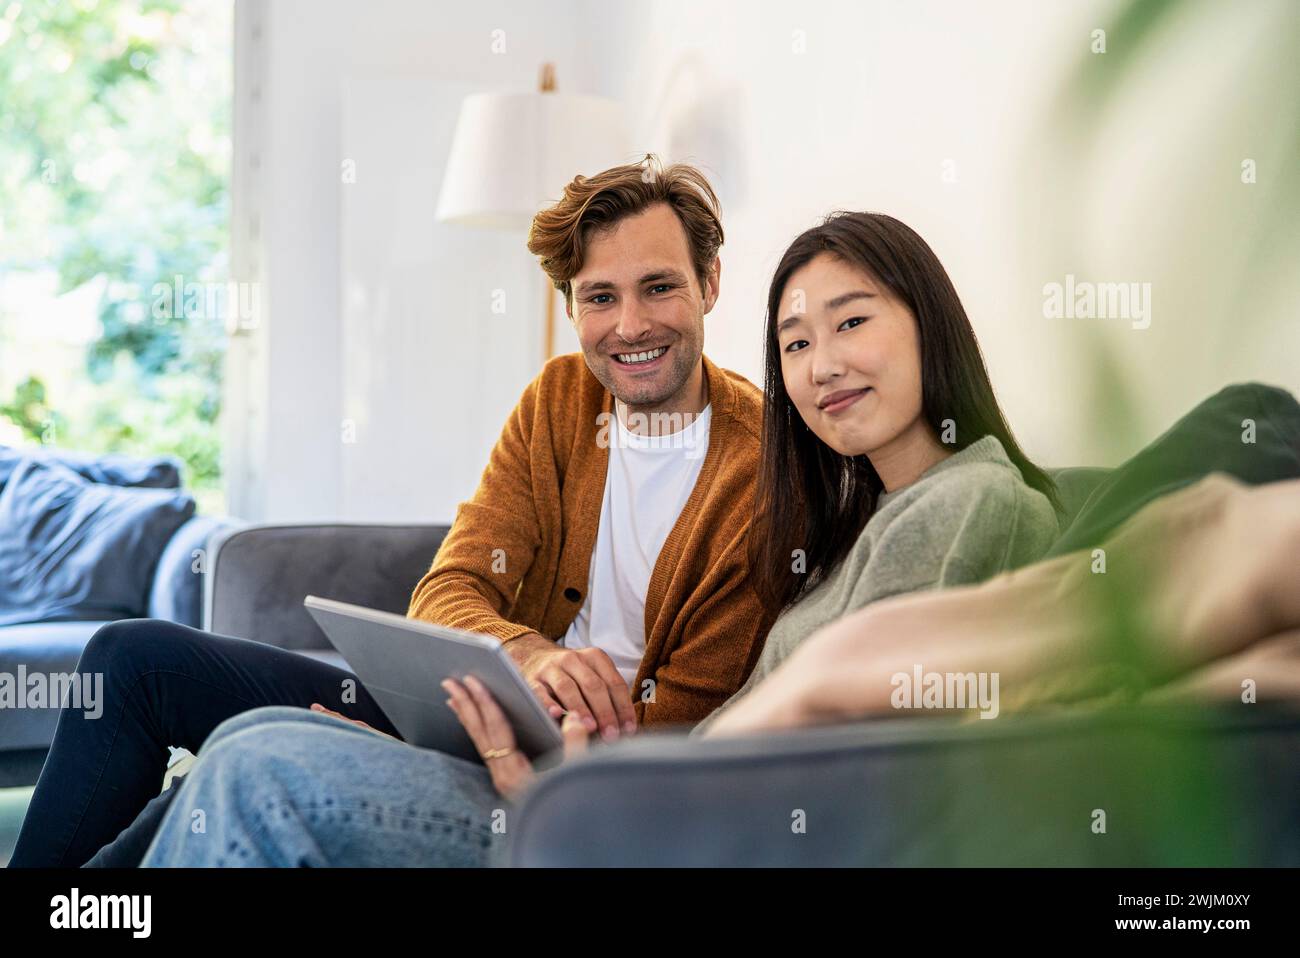 Adult couple looking at the camera while sitting on sofa using digital tablet Stock Photo